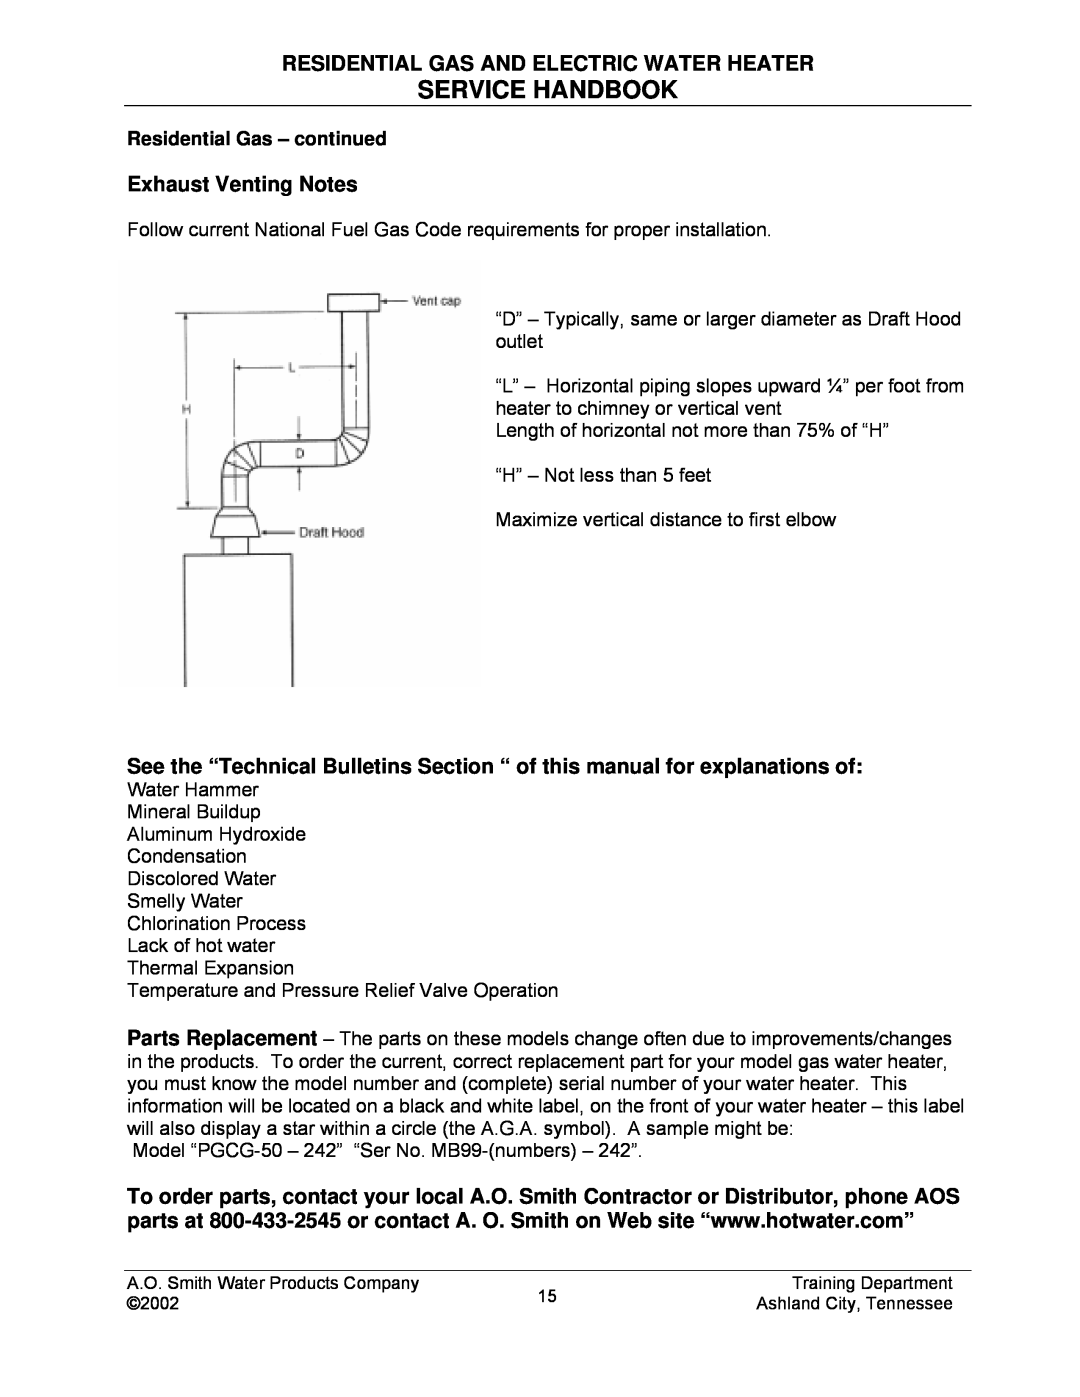 A.O. Smith TC-049-R2 manual Service Handbook, Residential Gas And Electric Water Heater, Exhaust Venting Notes 